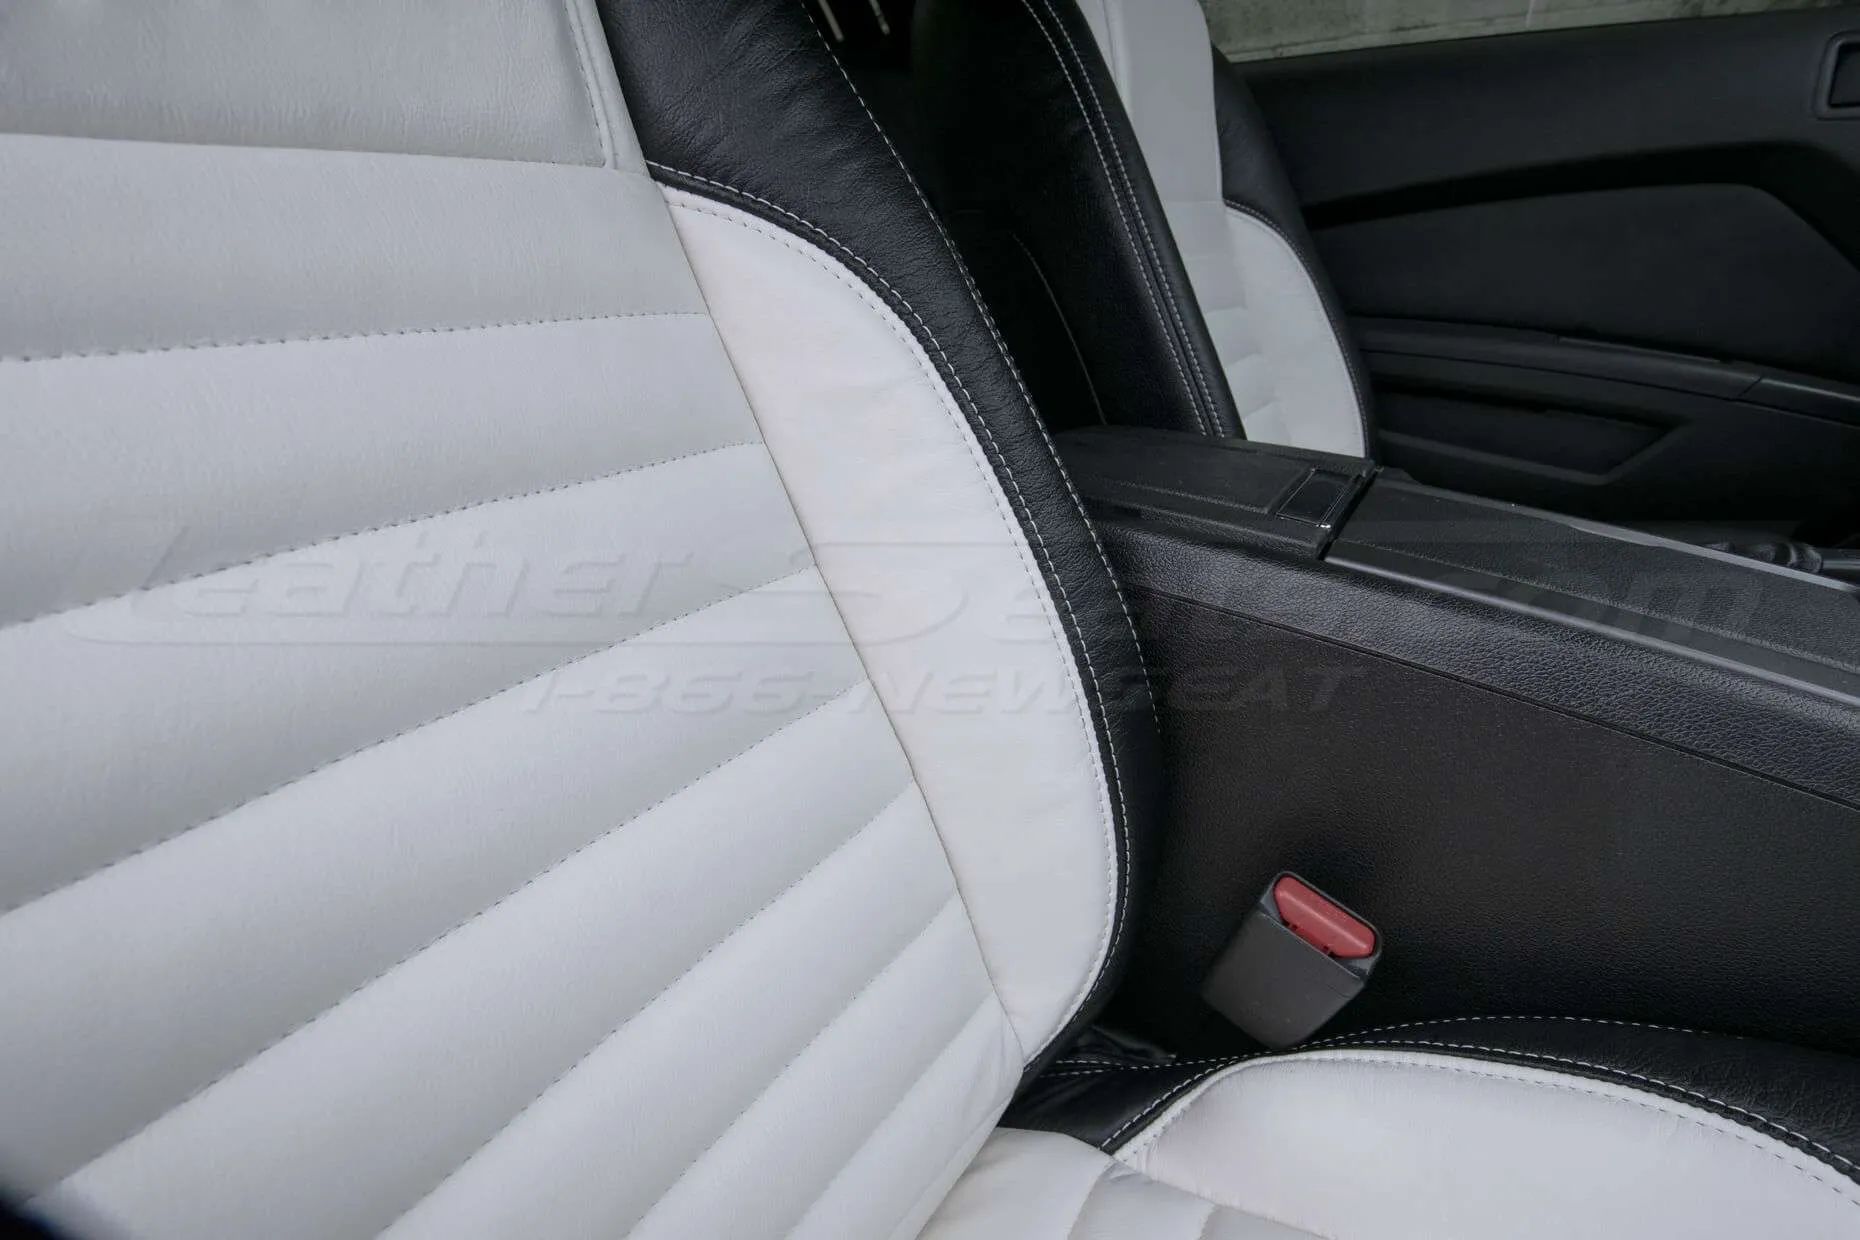 Ford Mustang installed leather kit - Black & White - Front backrest bolster & stitching